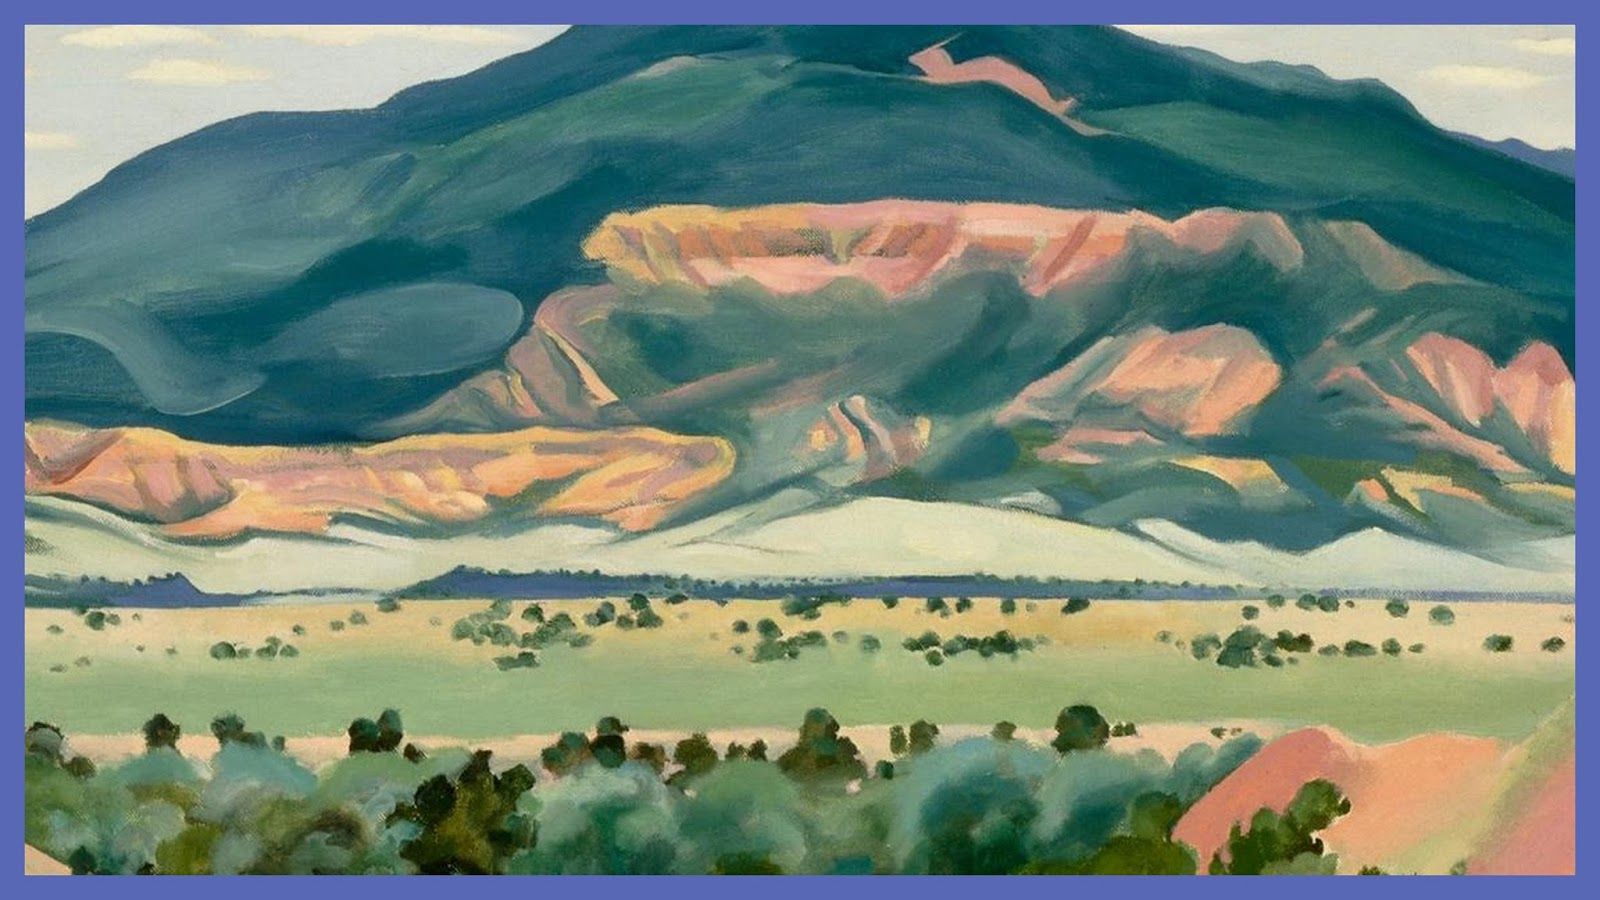 Re -Train Your Brain To Happiness: Georgia O'Keeffe: The Artist Who Captured America